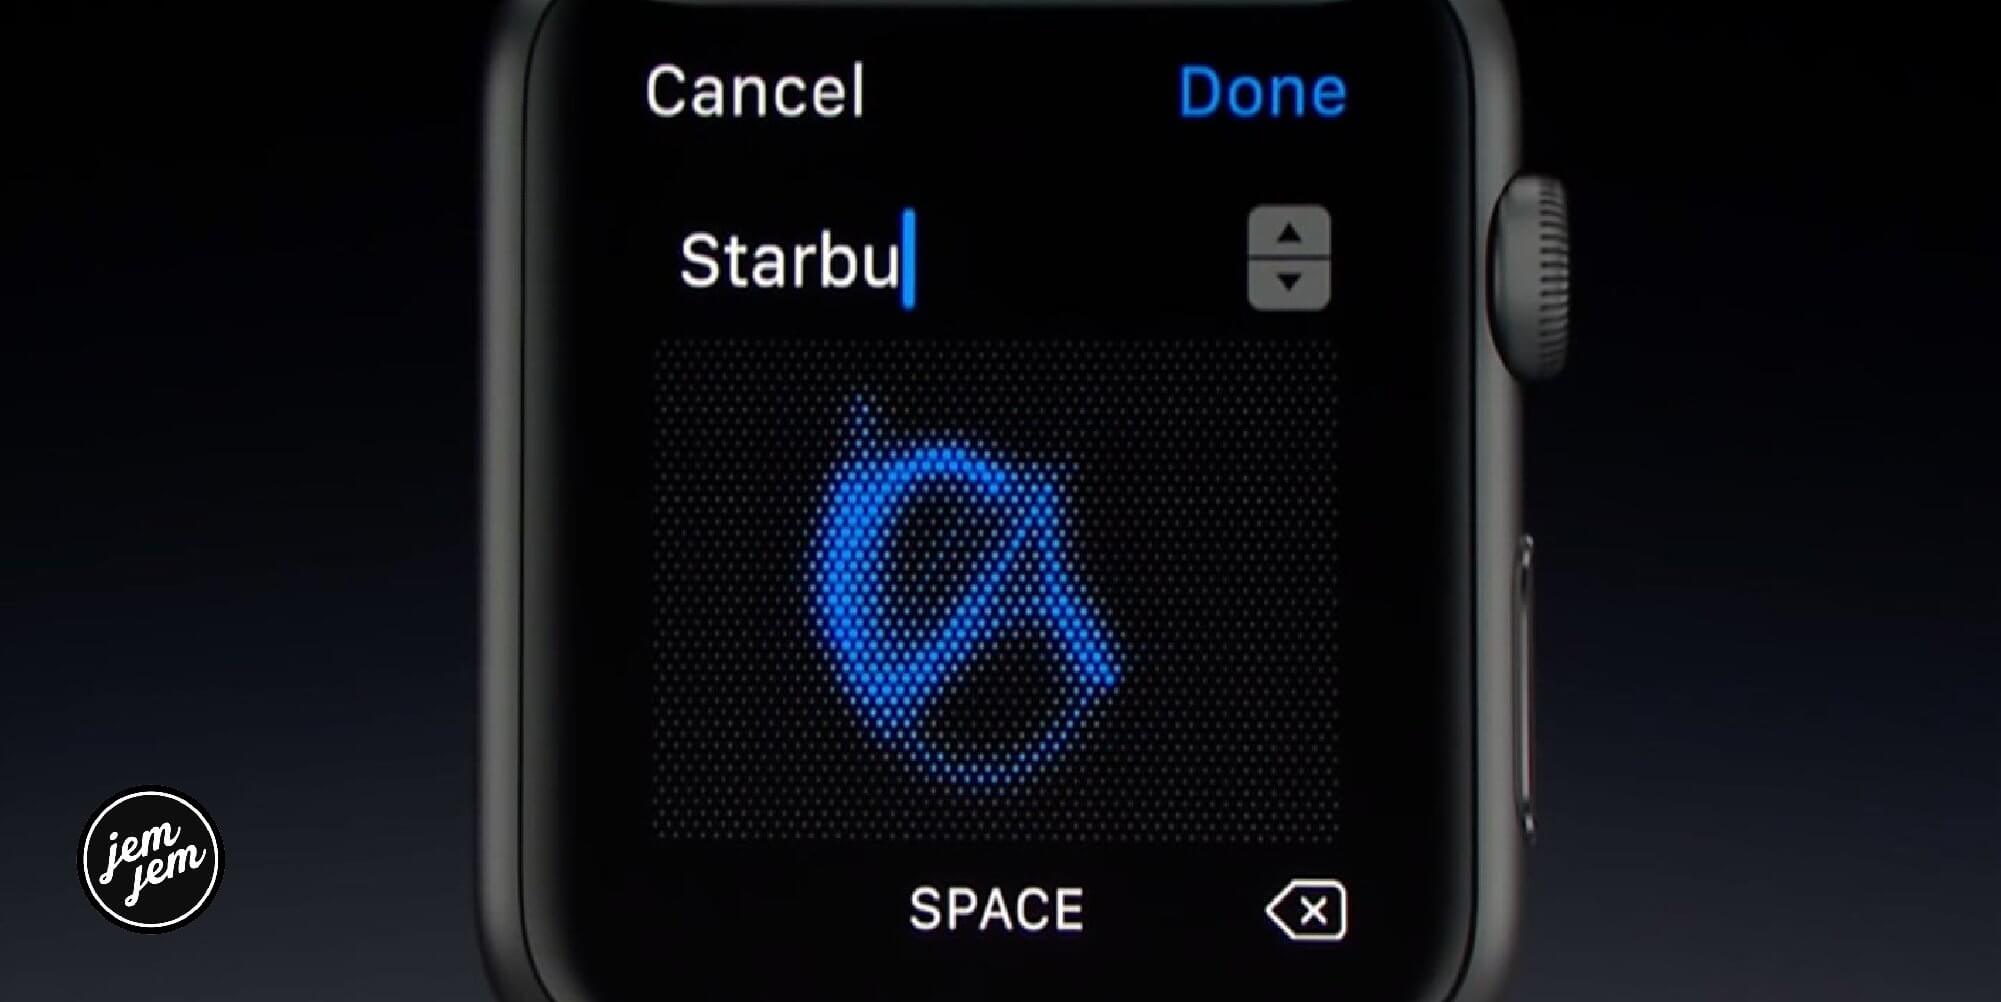 How to use Scribble to send an emoji on Apple Watch